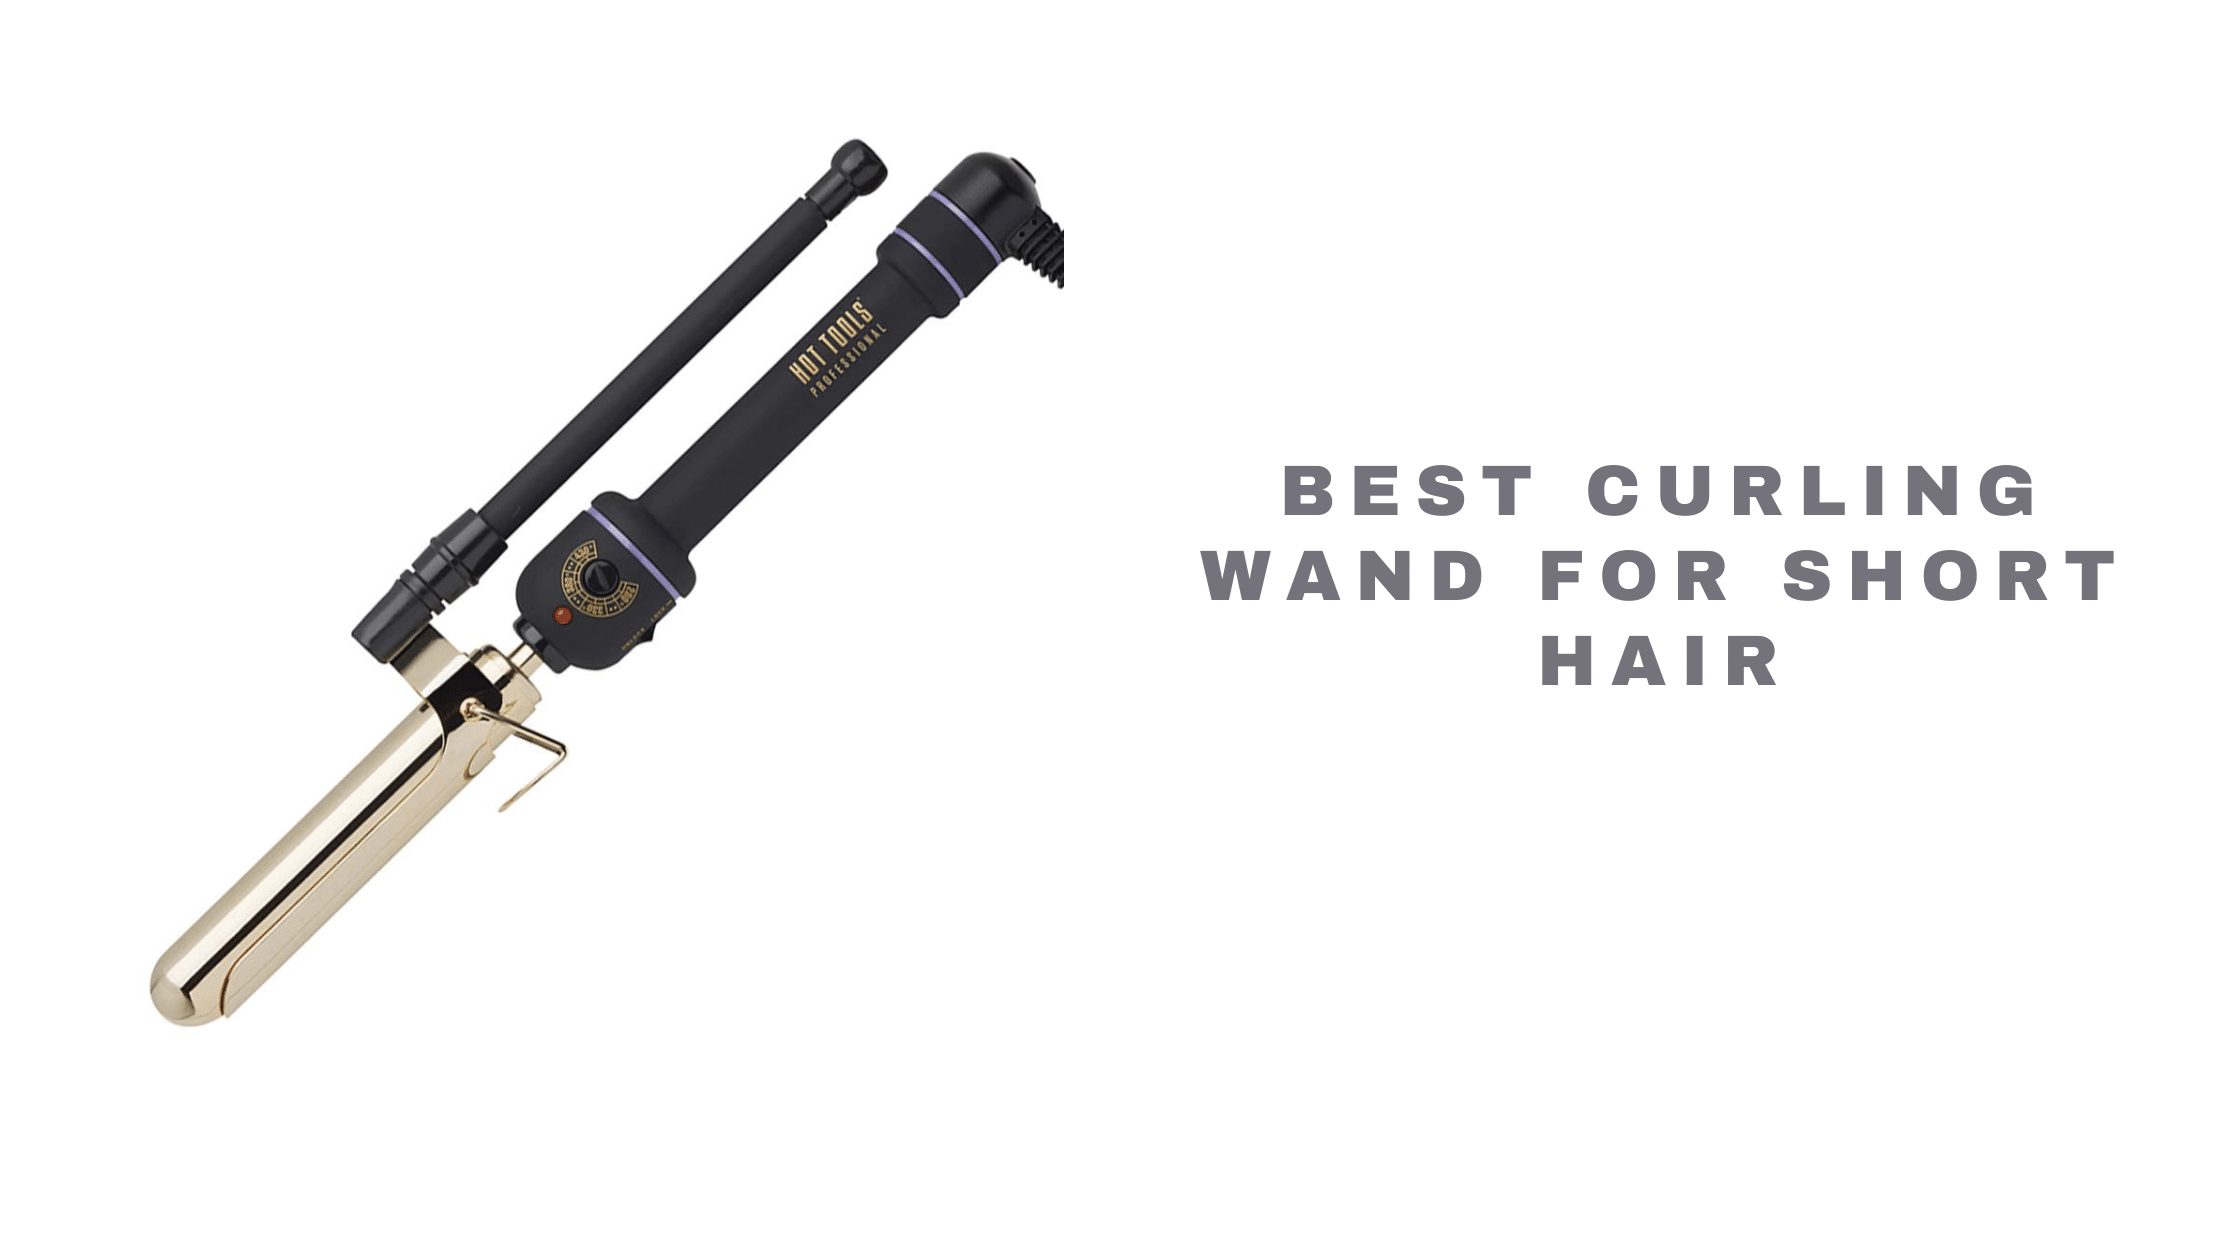 Best Curling Wand for Short Hair 2021